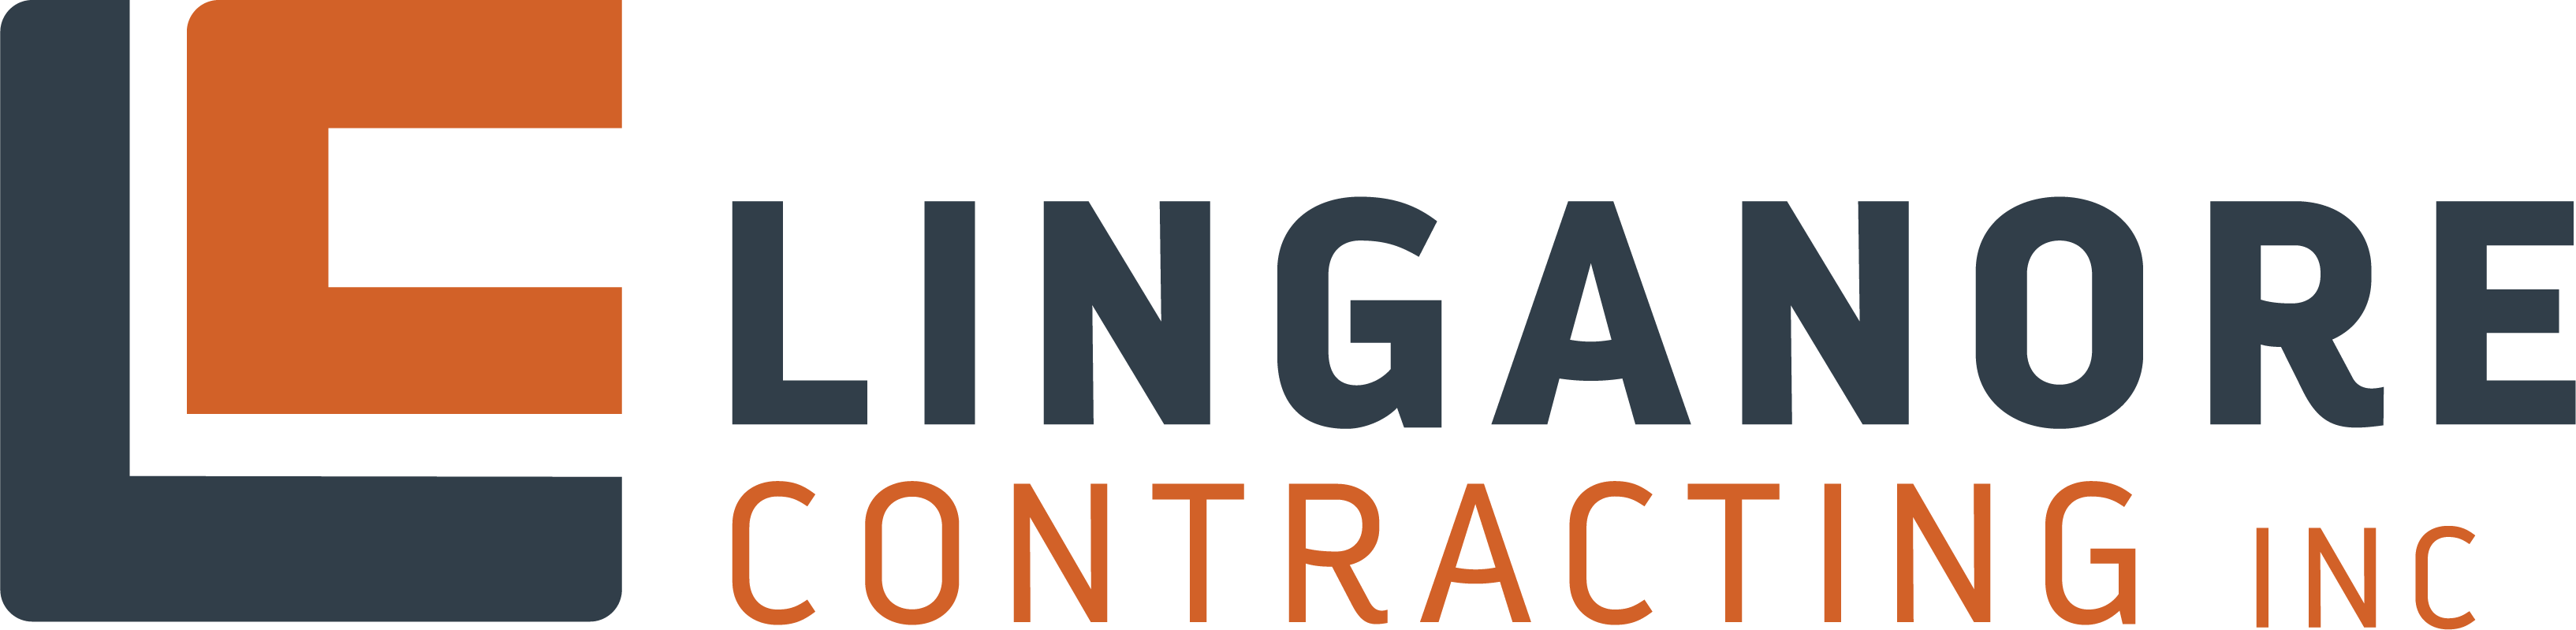 Linganore Contracting Incorporated Logo